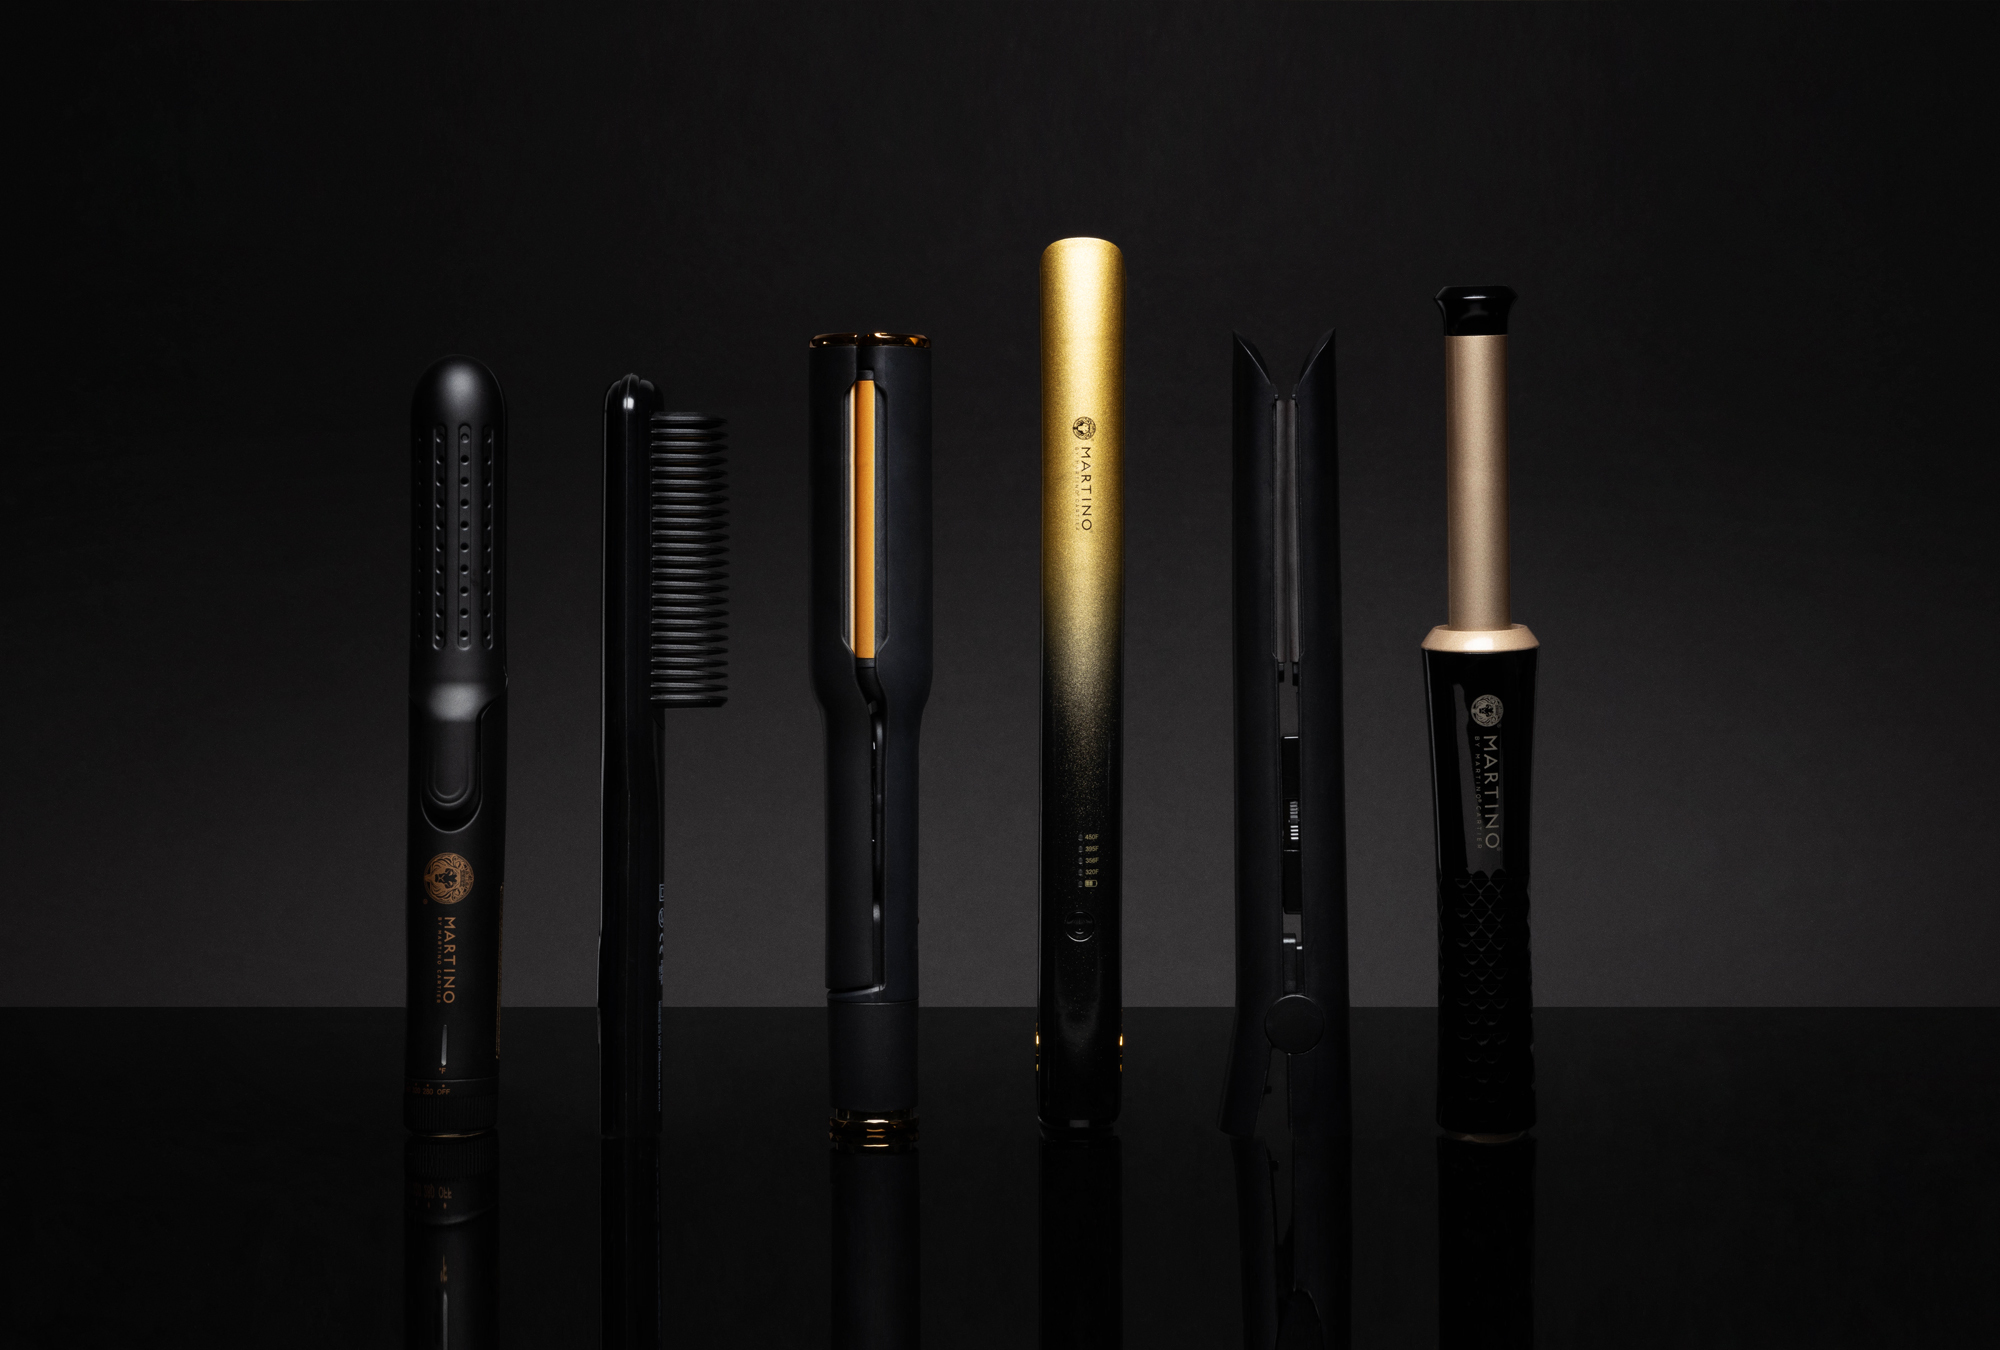 Martino Cartier Professional Hair Styling Tools